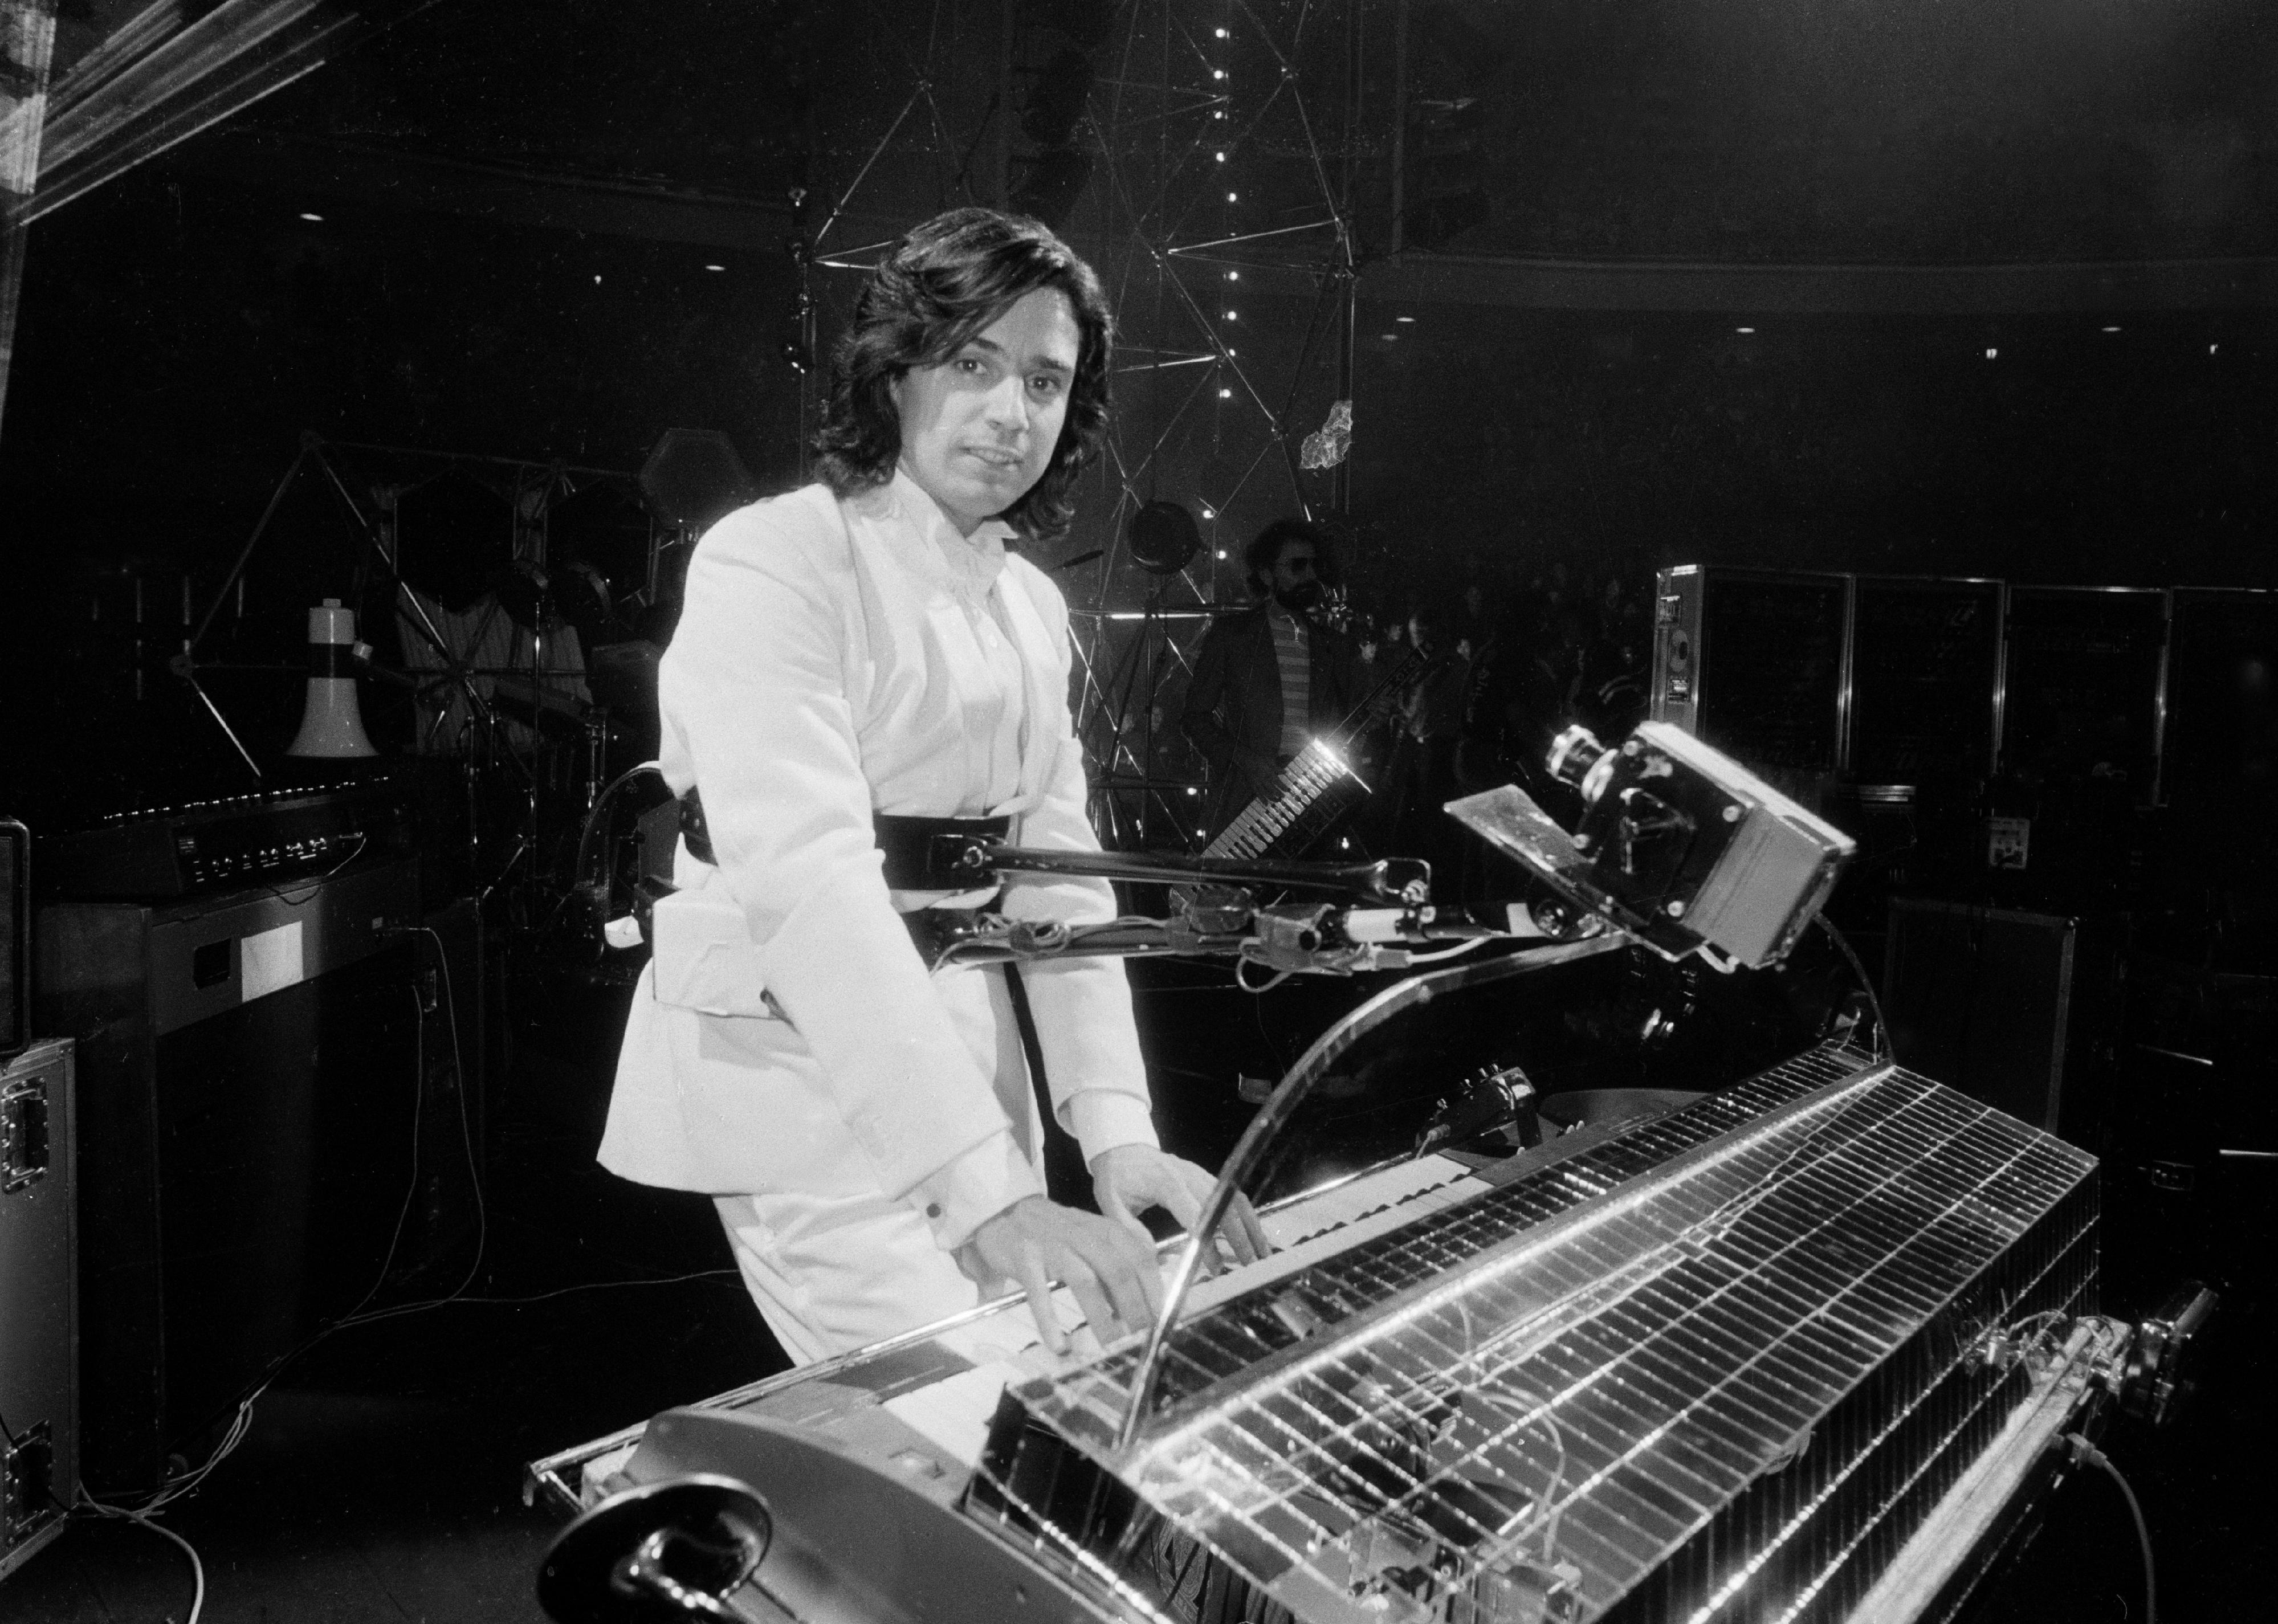 <p>French electronic artist Jean-Michel Jarre turned the city of Houston itself into a sprawling venue with this epic concert event. Held in support of his 1986 album "Rendez-vous," it broke a Guinness World Record for the <a href="https://www.chron.com/news/houston-texas/houston/article/Rendez-Vous-Houston-in-1986-brought-Guinness-7229060.php">largest crowd ever to witness a sound-and-light display</a>.</p>